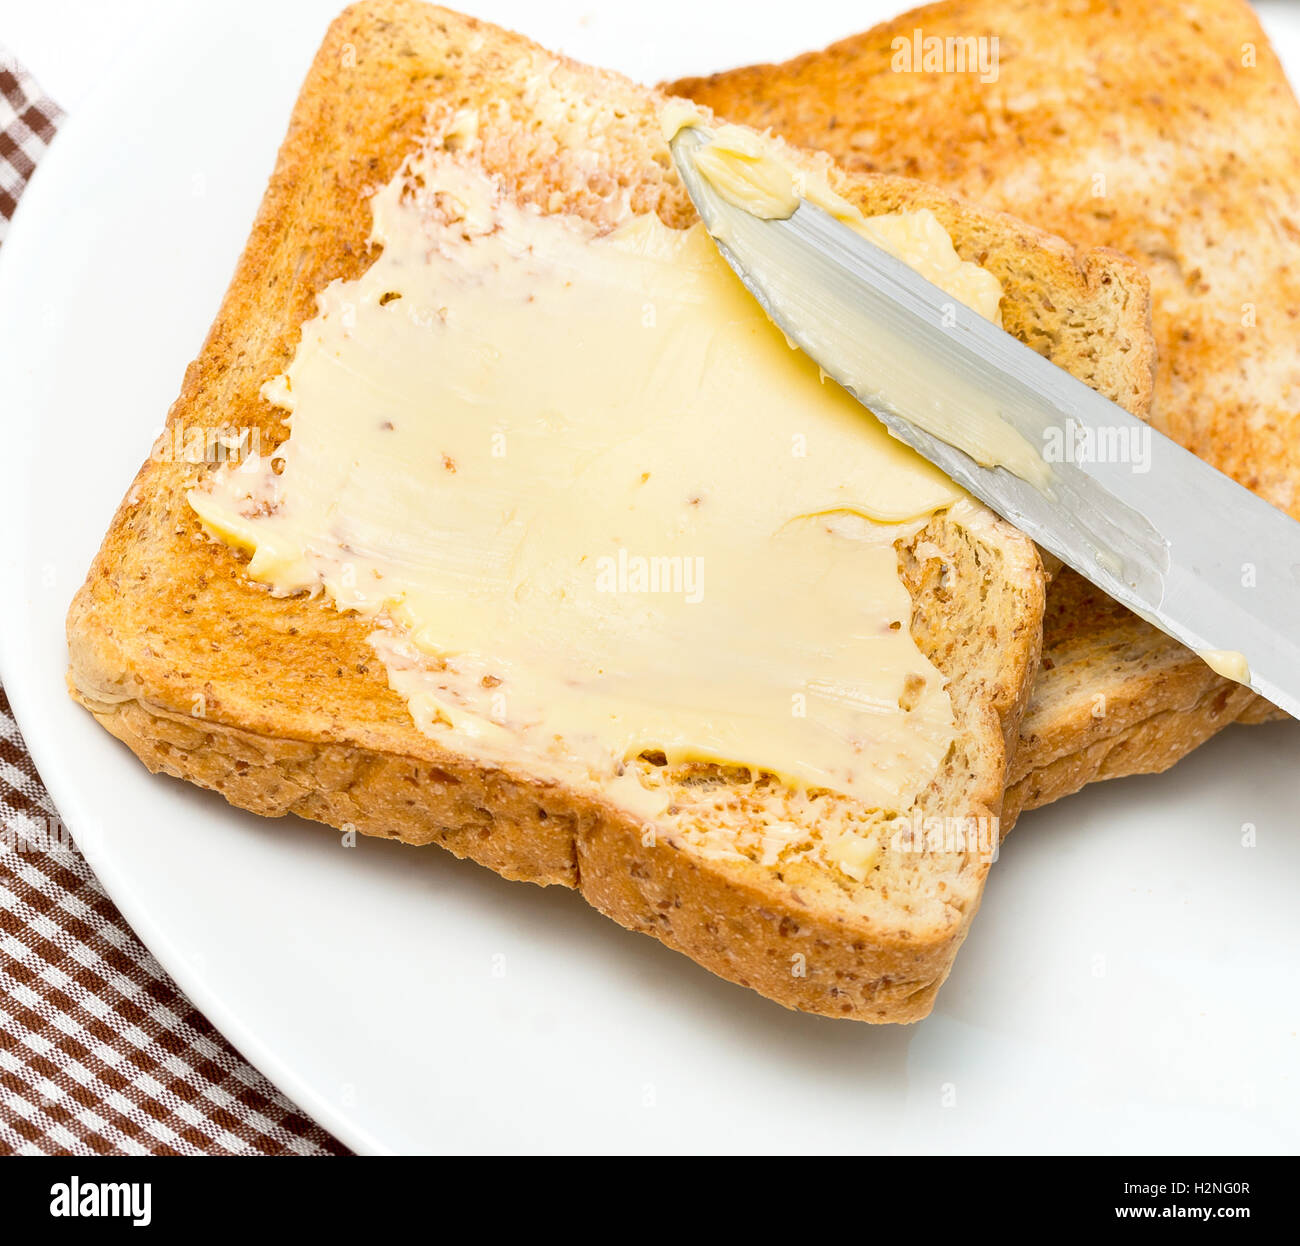 Bread With Butter Meaning Meal Time And Cafes Stock Photo Alamy